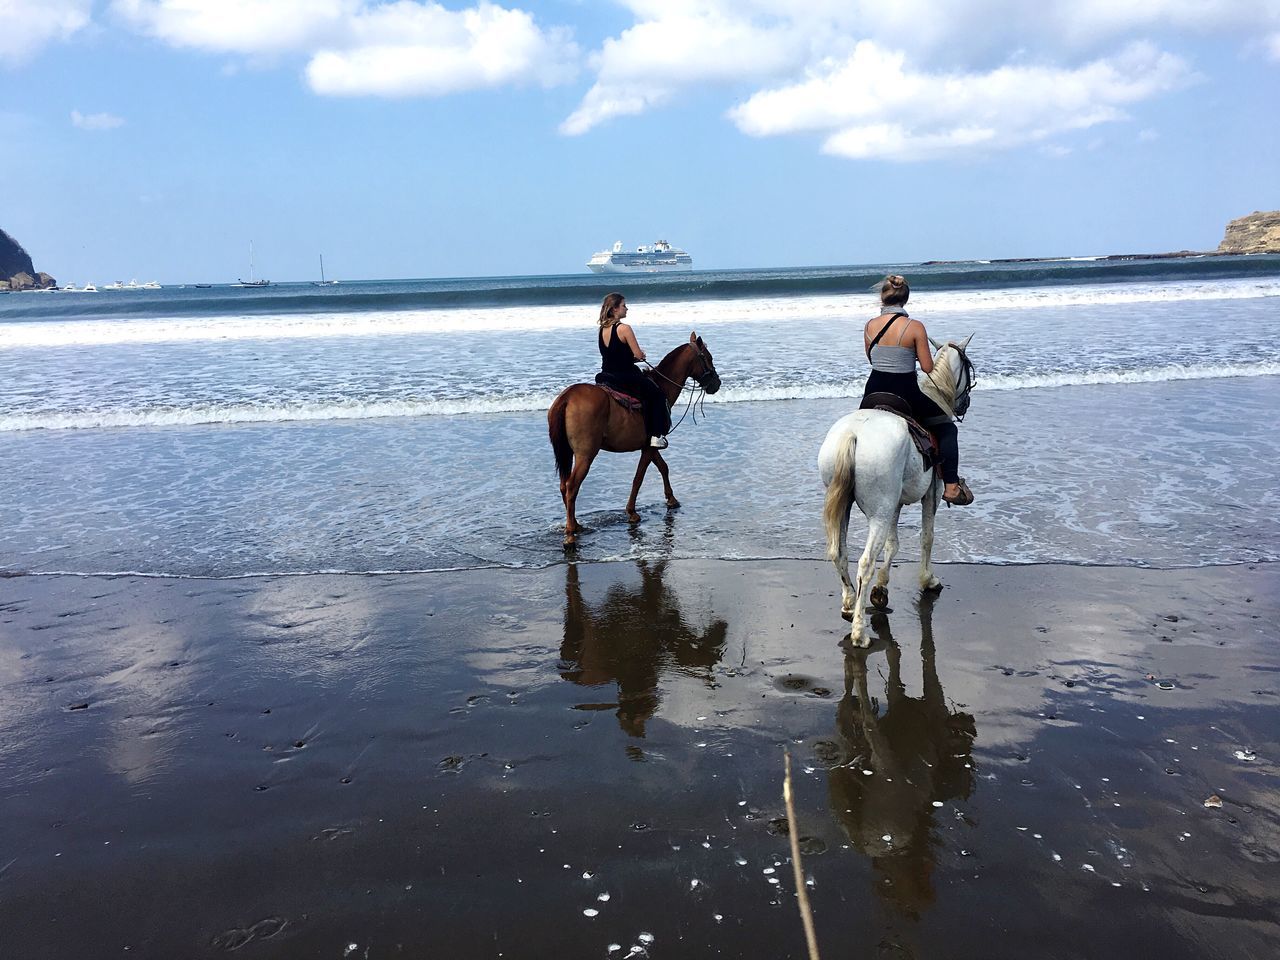 horse, domestic animals, horseback riding, sea, beach, sky, riding, mammal, water, nature, men, real people, sand, cloud - sky, outdoors, day, horizon over water, horse racing, beauty in nature, people